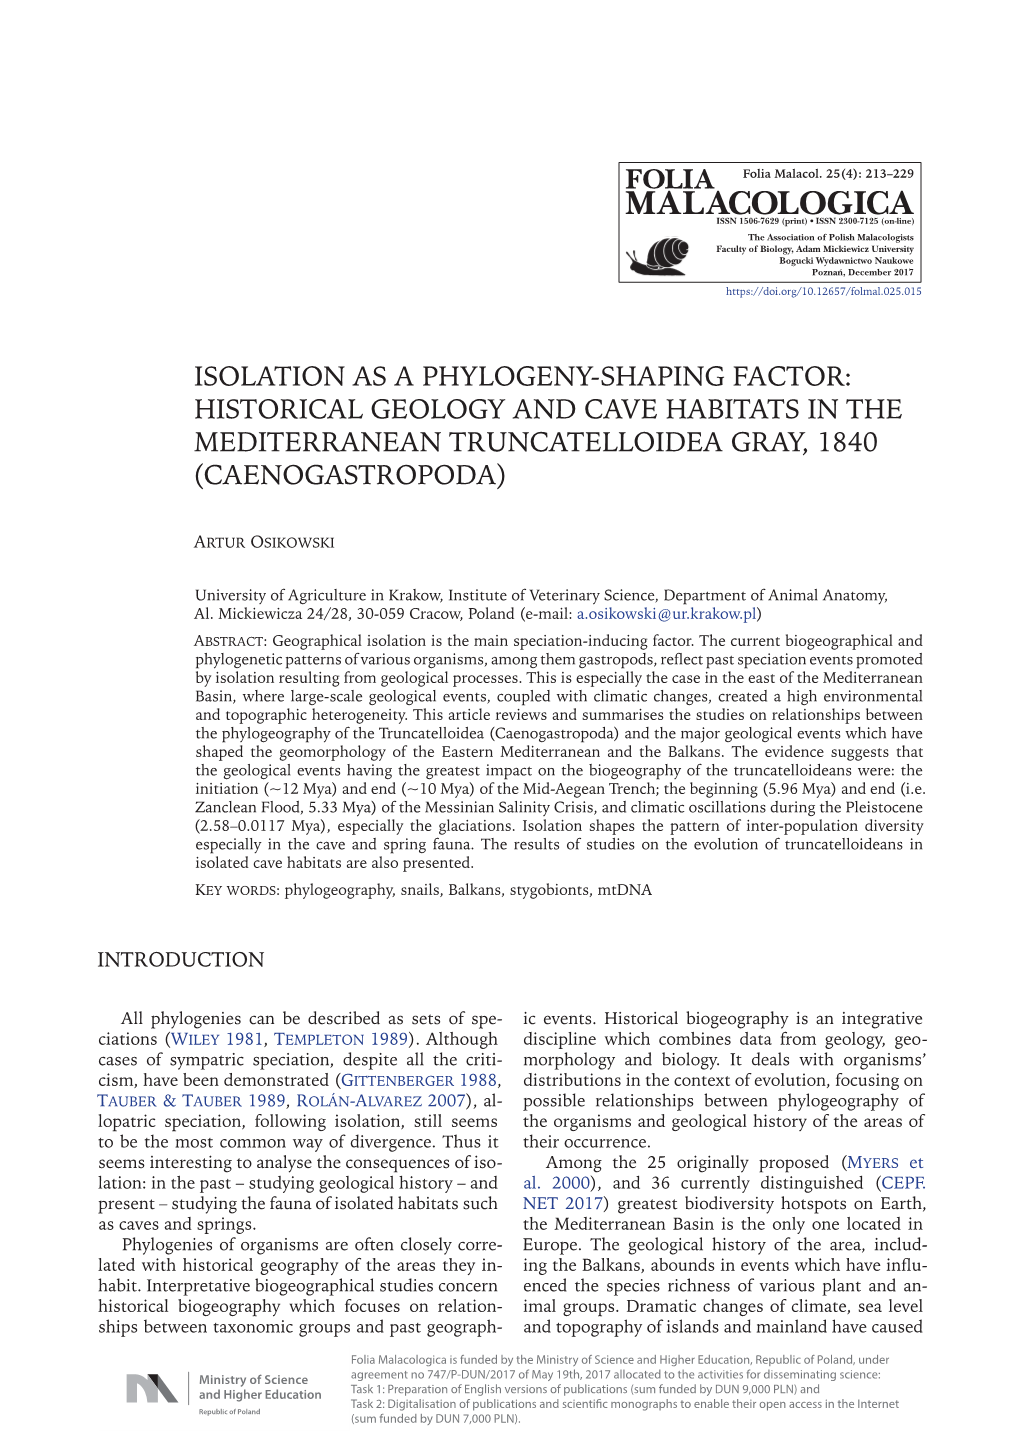 Isolation As a Phylogeny-Shaping Factor: Historical Geology and Cave Habitats in the Mediterranean Truncatelloidea Gray, 1840 (Caenogastropoda)